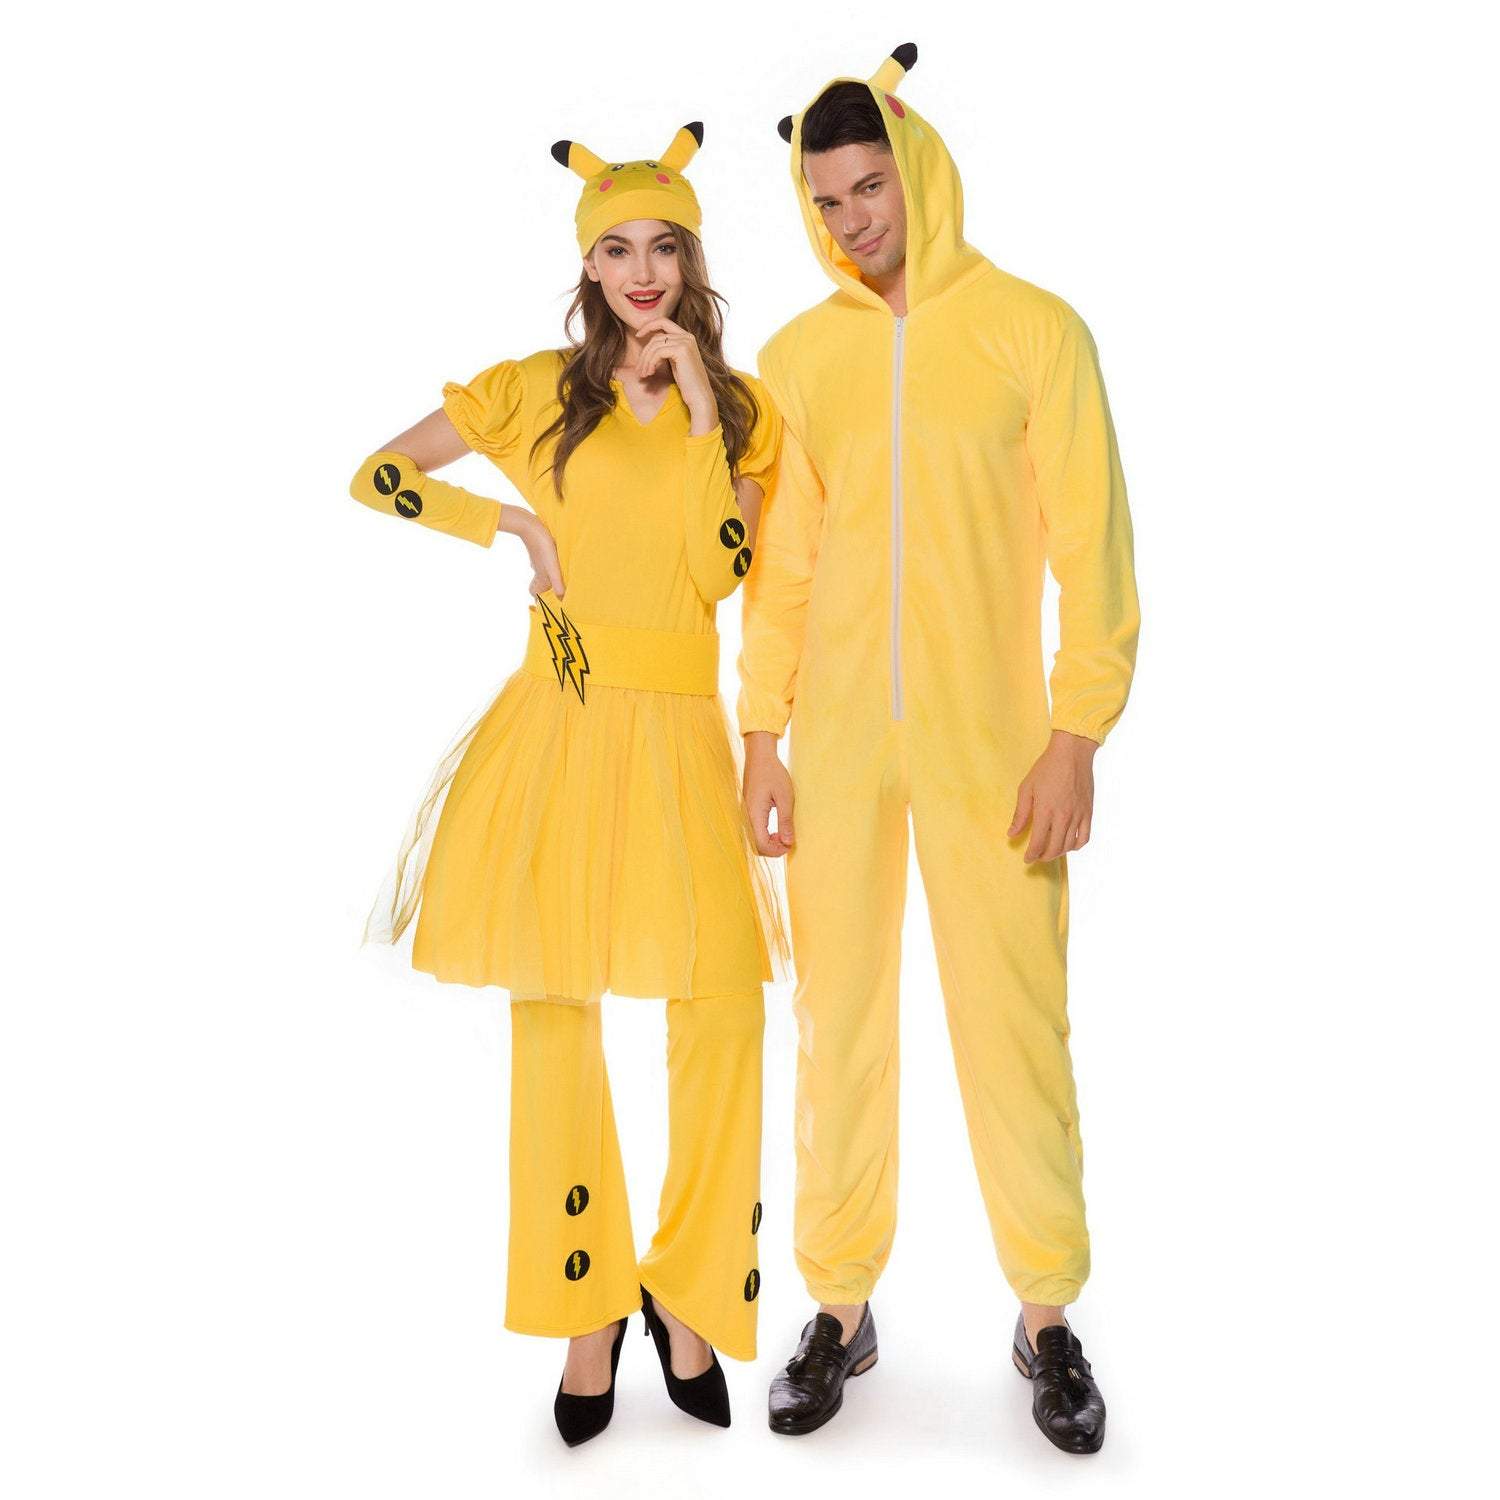 Pokémon Costumes Pikachu Cosplay Jumpsuit Halloween Couple Outfits